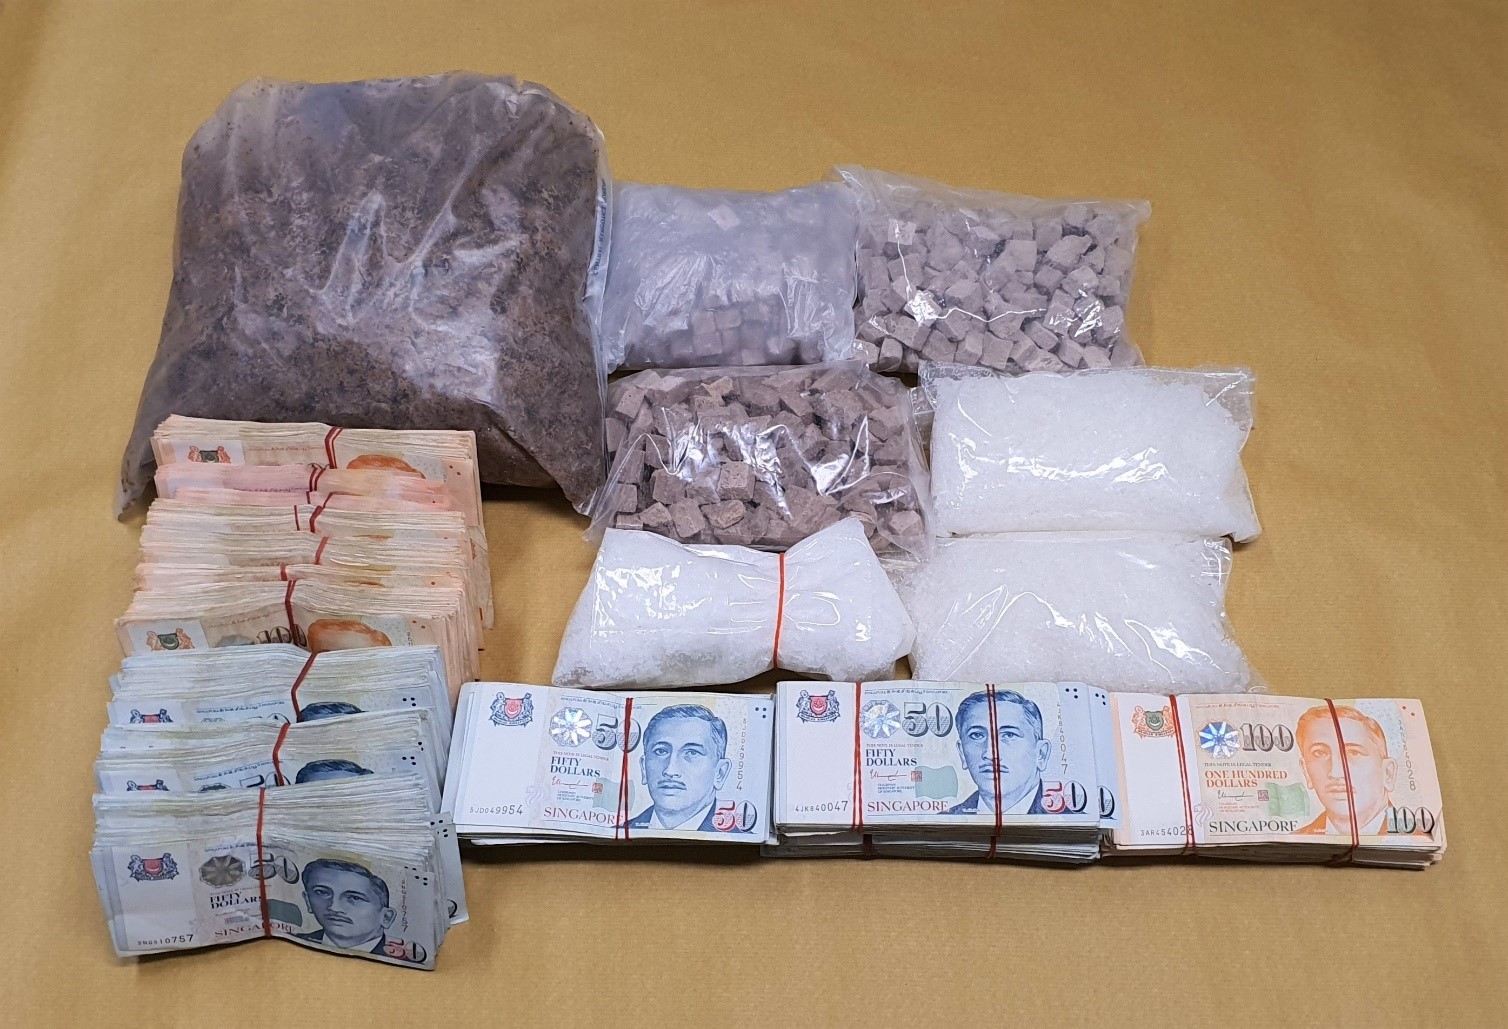 eroin, about 1,124g of ‘Ice’, and cash amounting to $174,000 were recovered from a unit in the vicinity of Bukit Batok Street 31, during a CNB raid on 21 September 2020. 